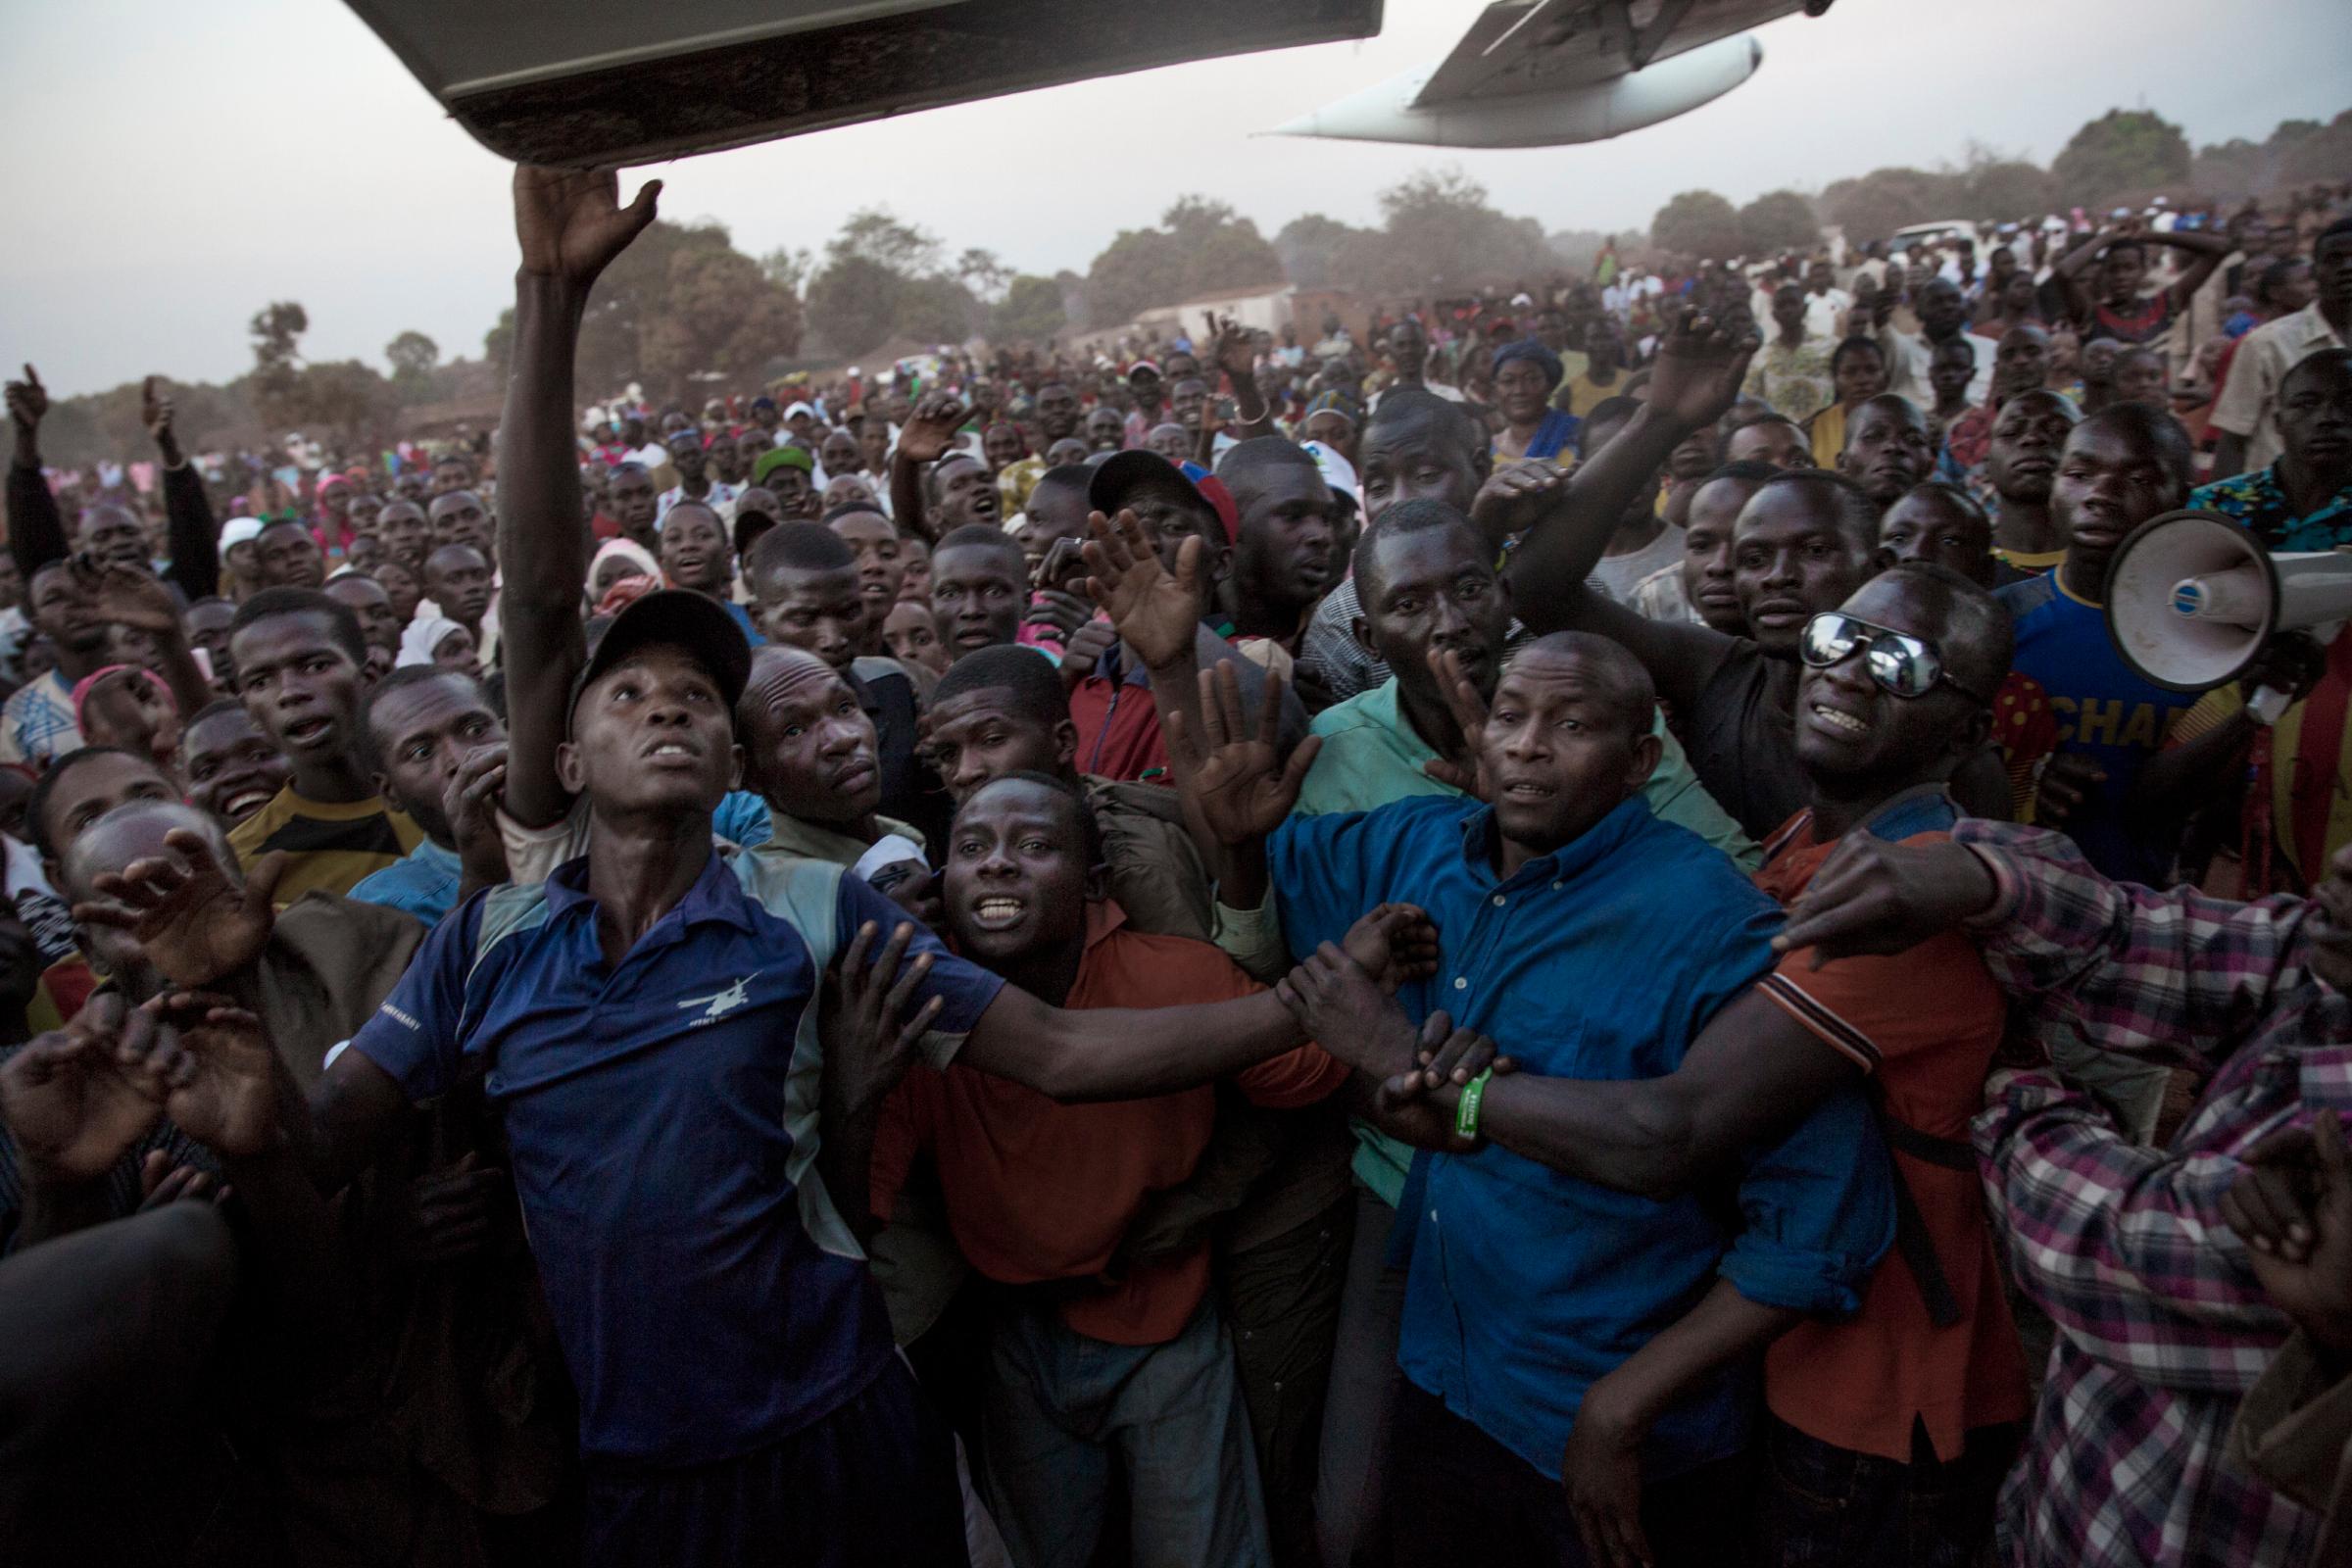 Supporters of Muslim presidential candidate Karim Meckassoua are held back at an airport in Bria, eastern Central African Republic, Dec. 24, 2015. Thousands of supporters, some asking for money, came to welcome him.